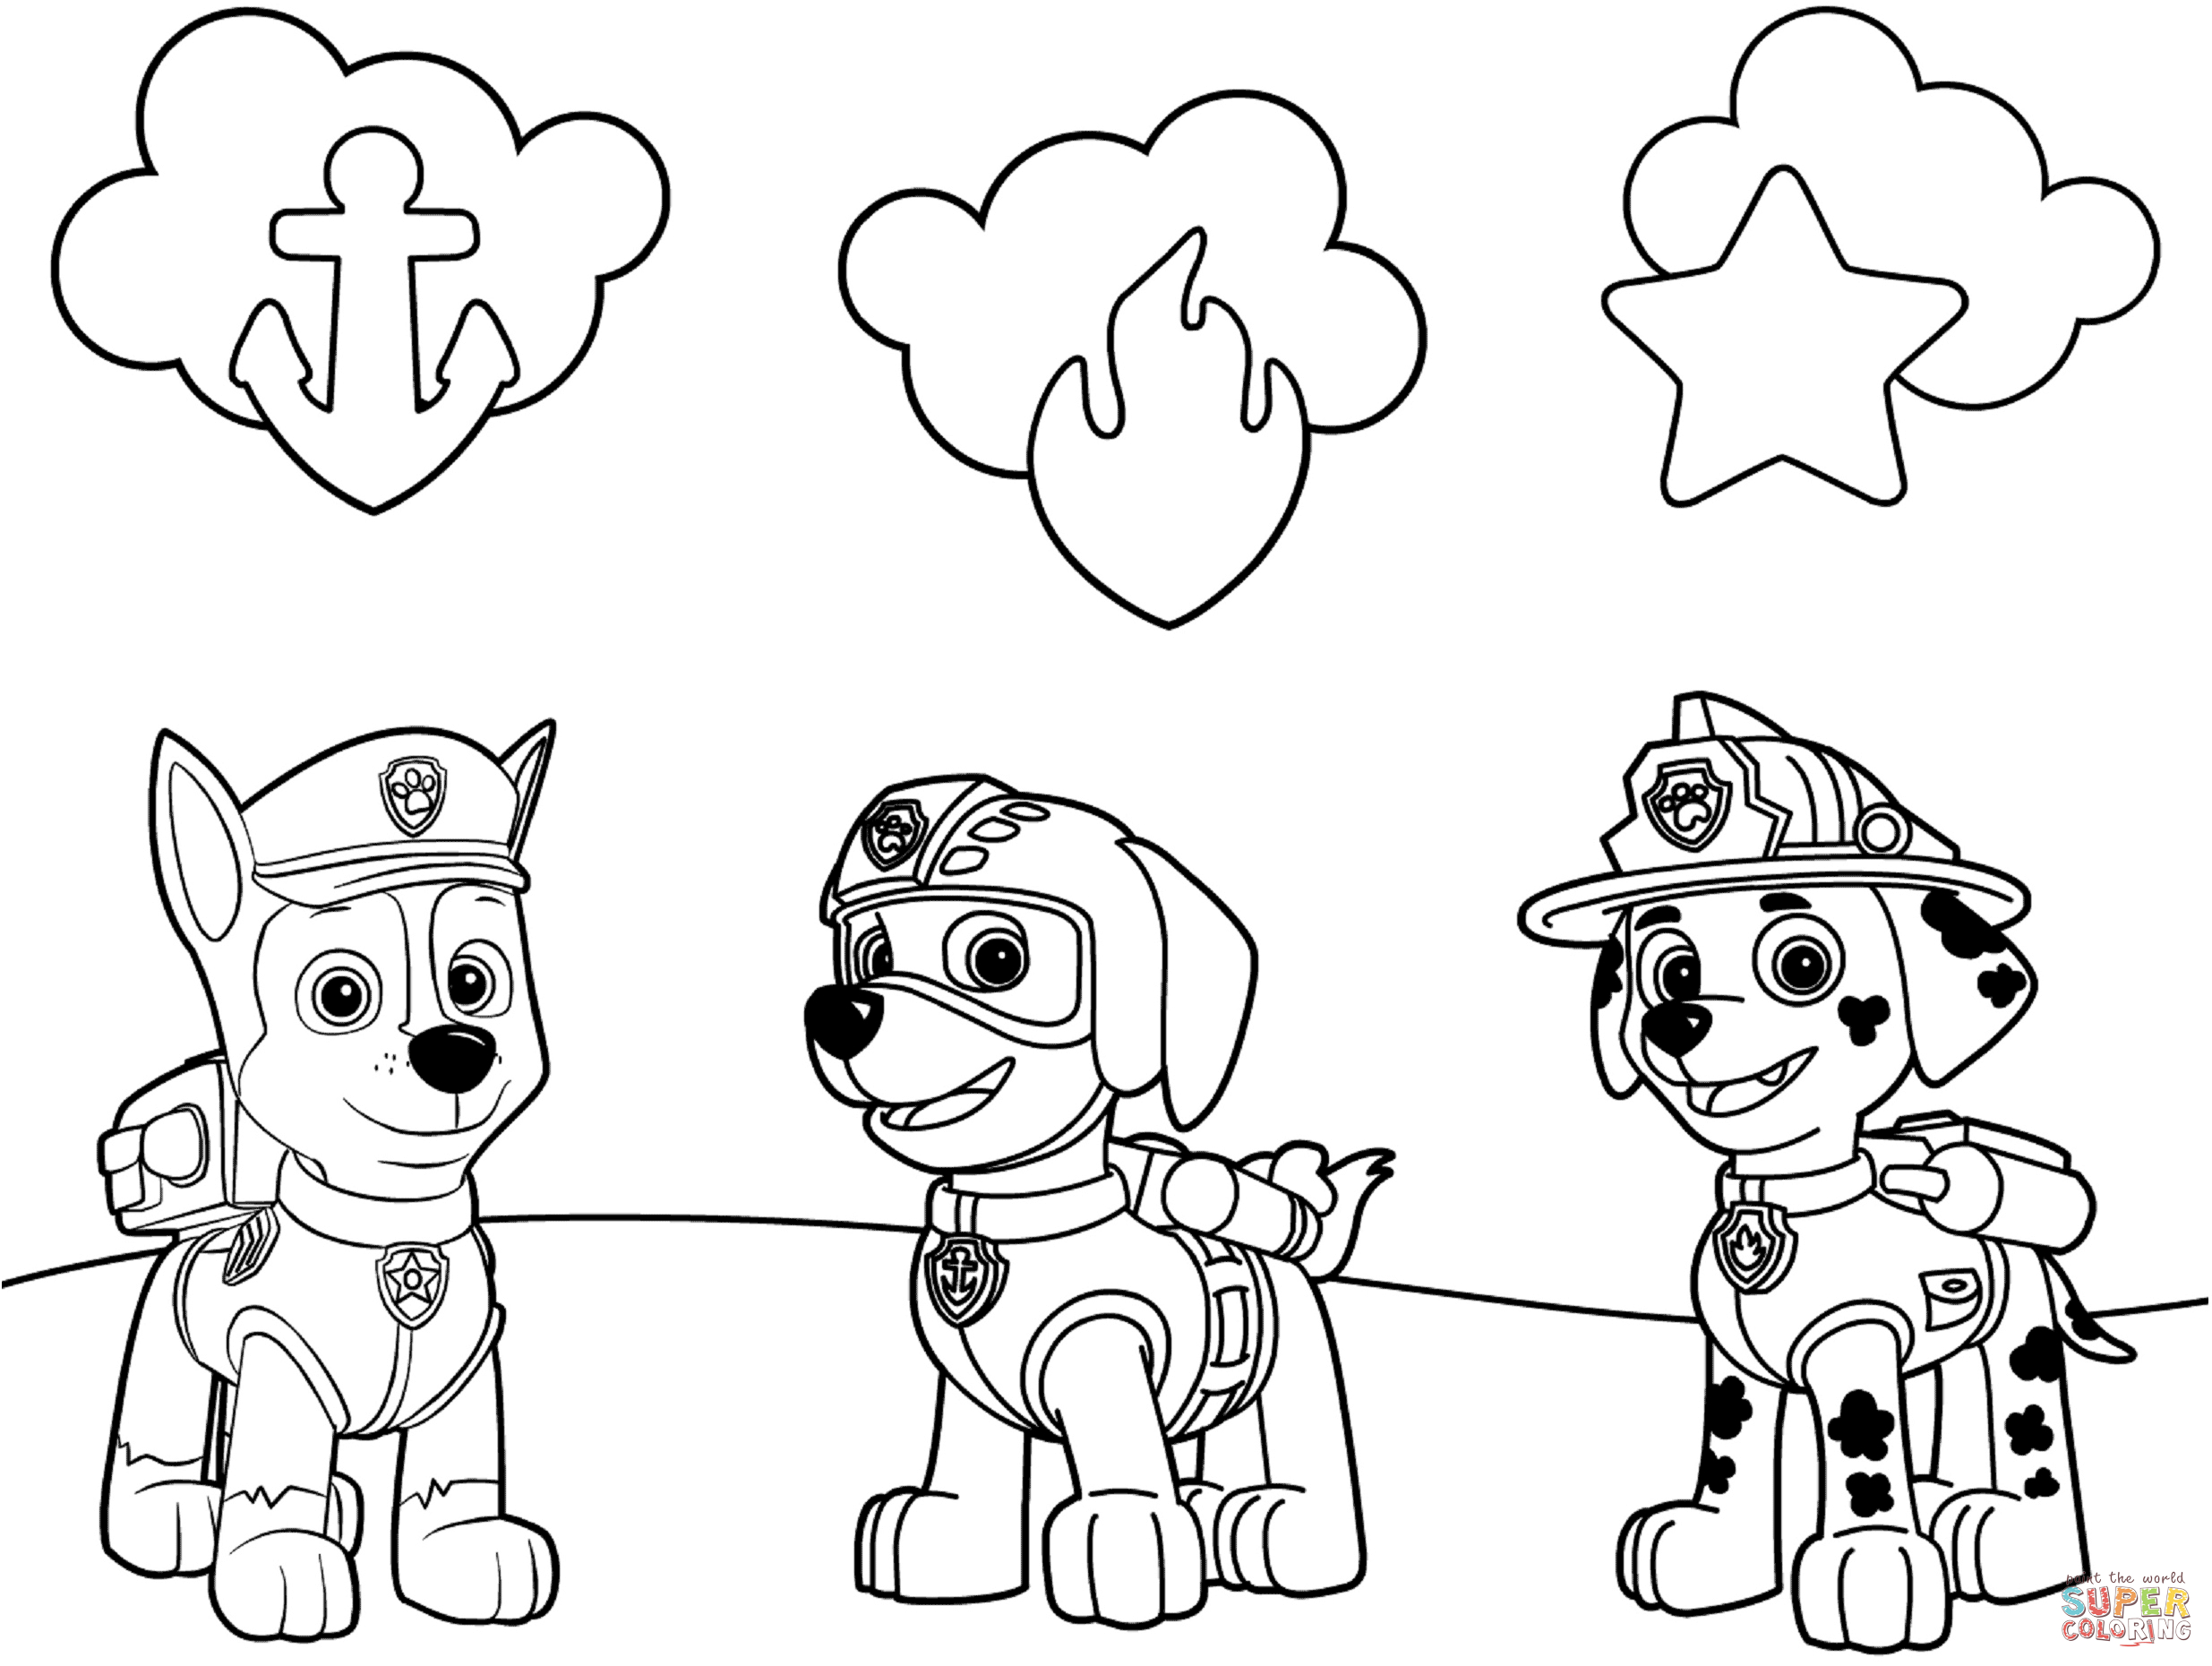 Paw Patrol Badges Coloring Page | Free Printable Coloring Pages - Free Printable Paw Patrol Coloring Pages